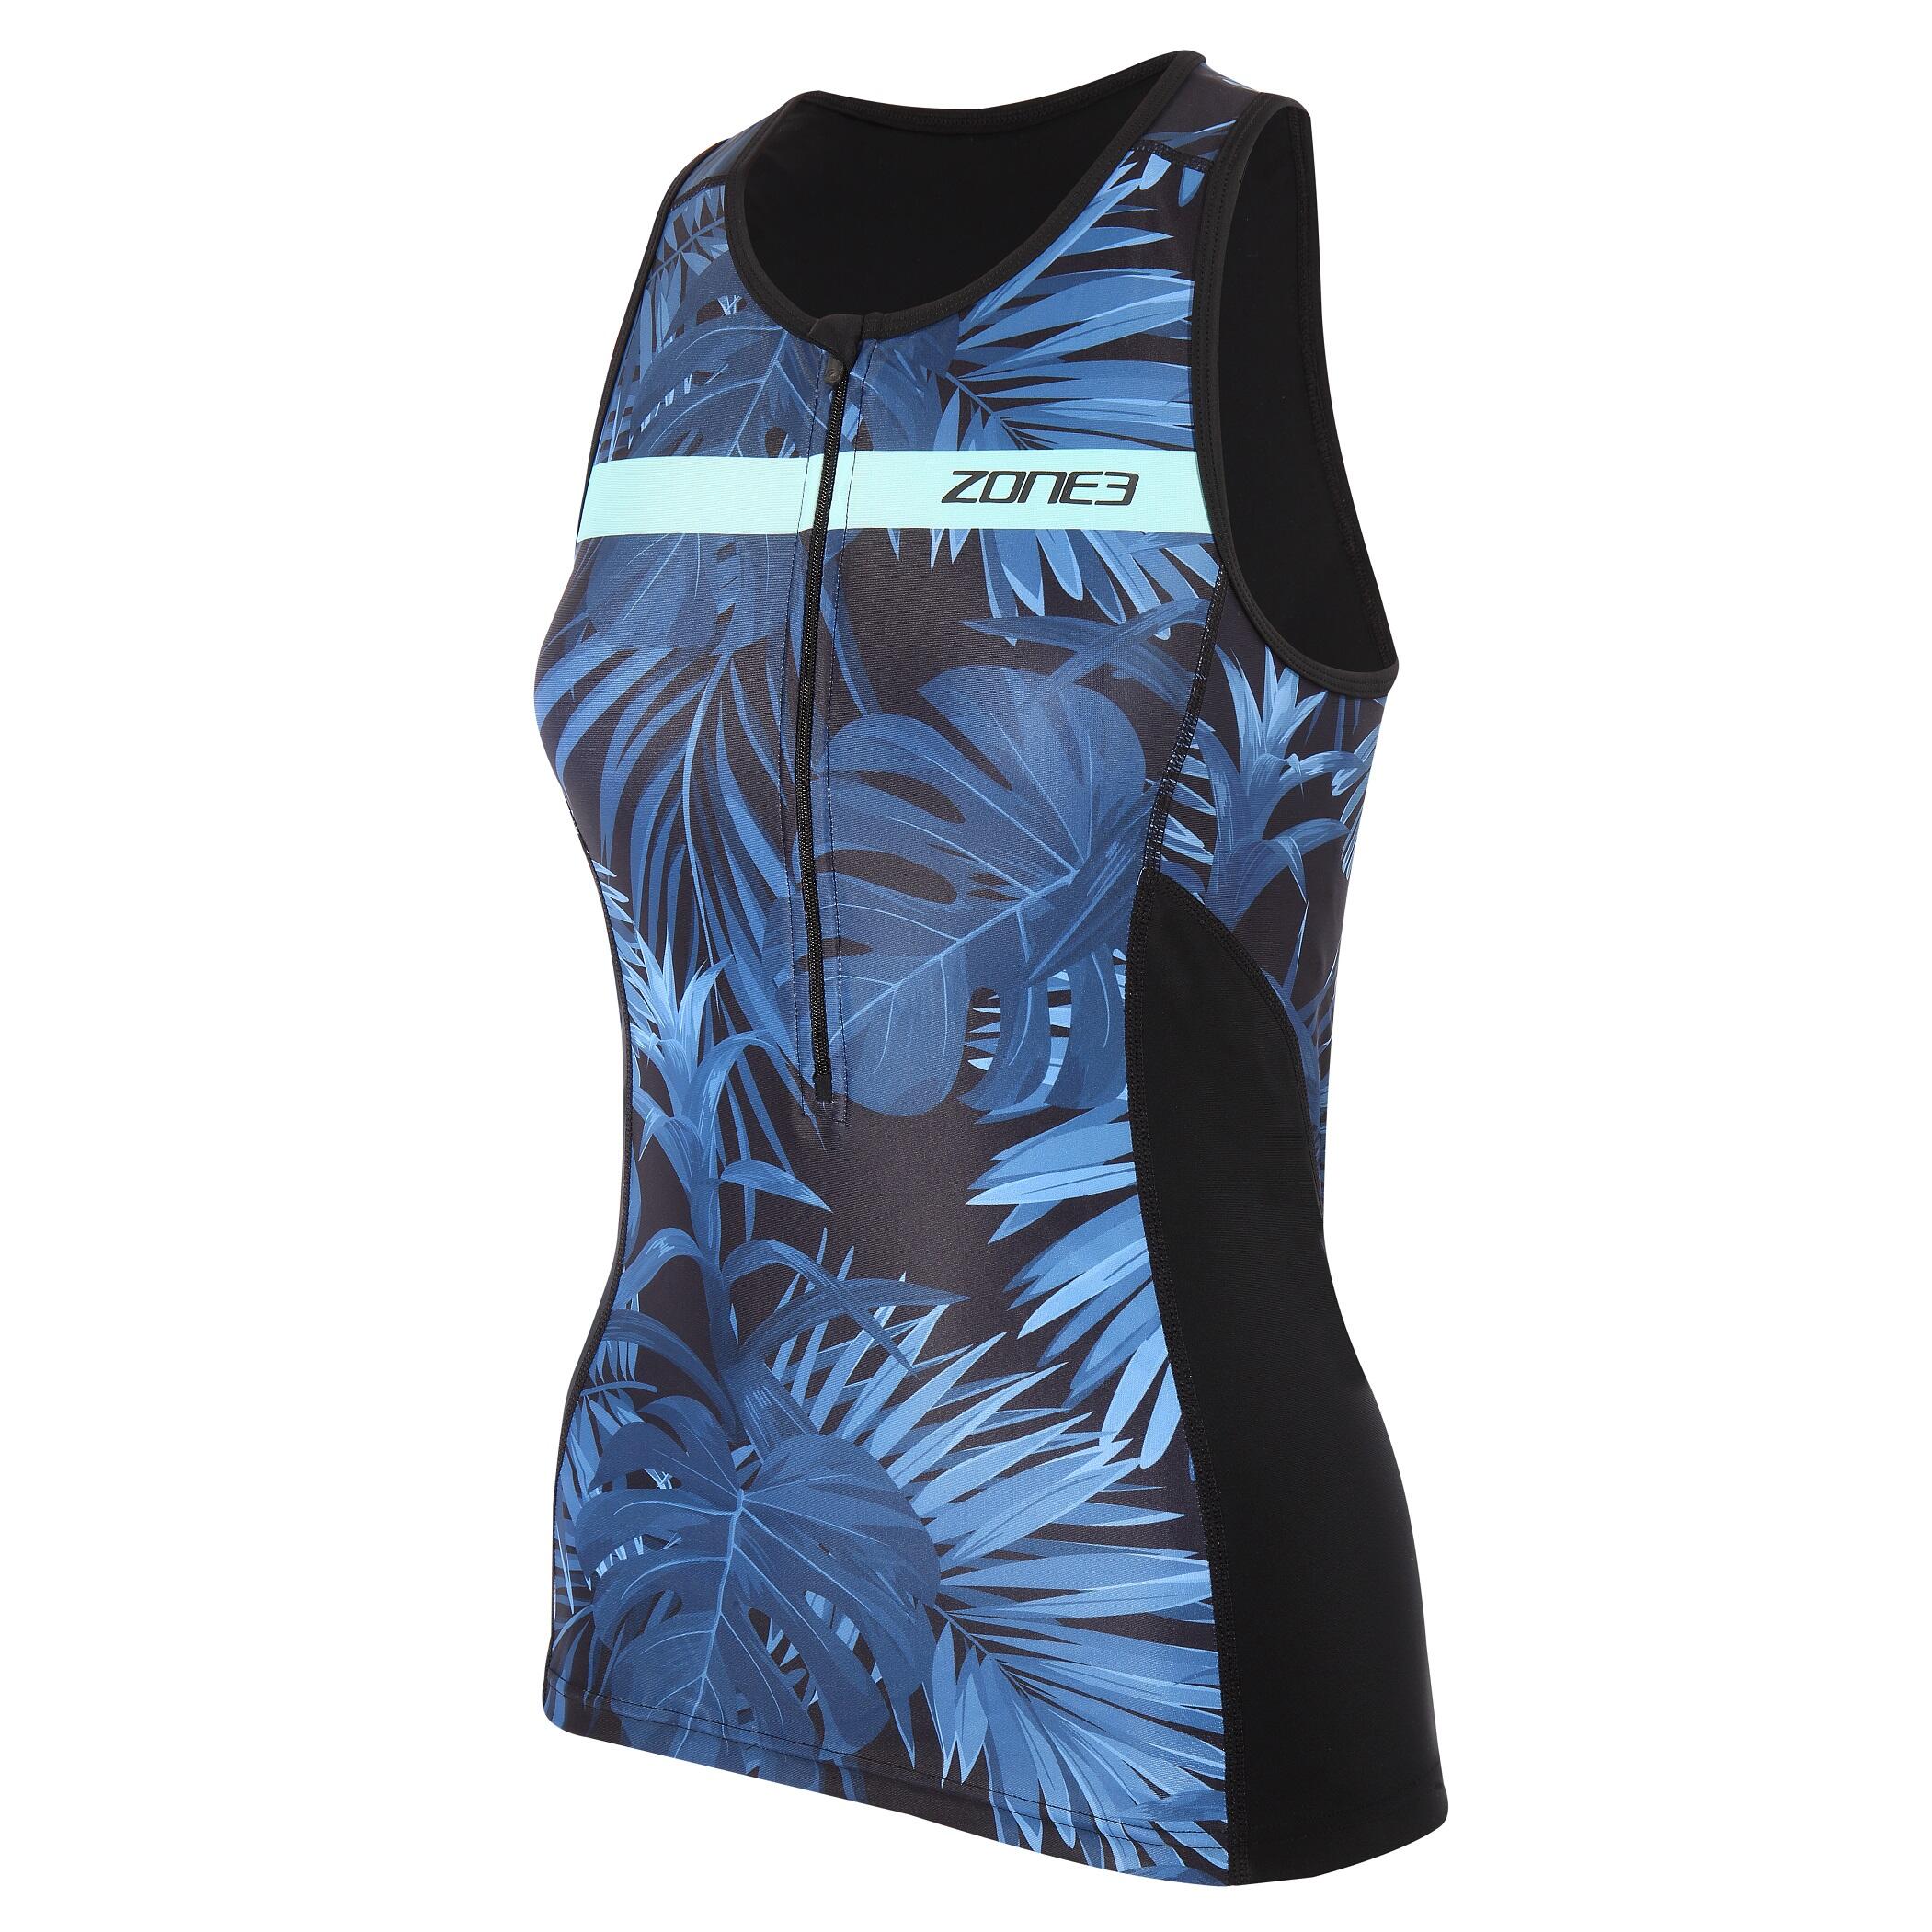 ZONE3 ACTIVATE+ TROPICAL PALM SLEEVELESS TRI TOP WOMENS BLACK/BLUE